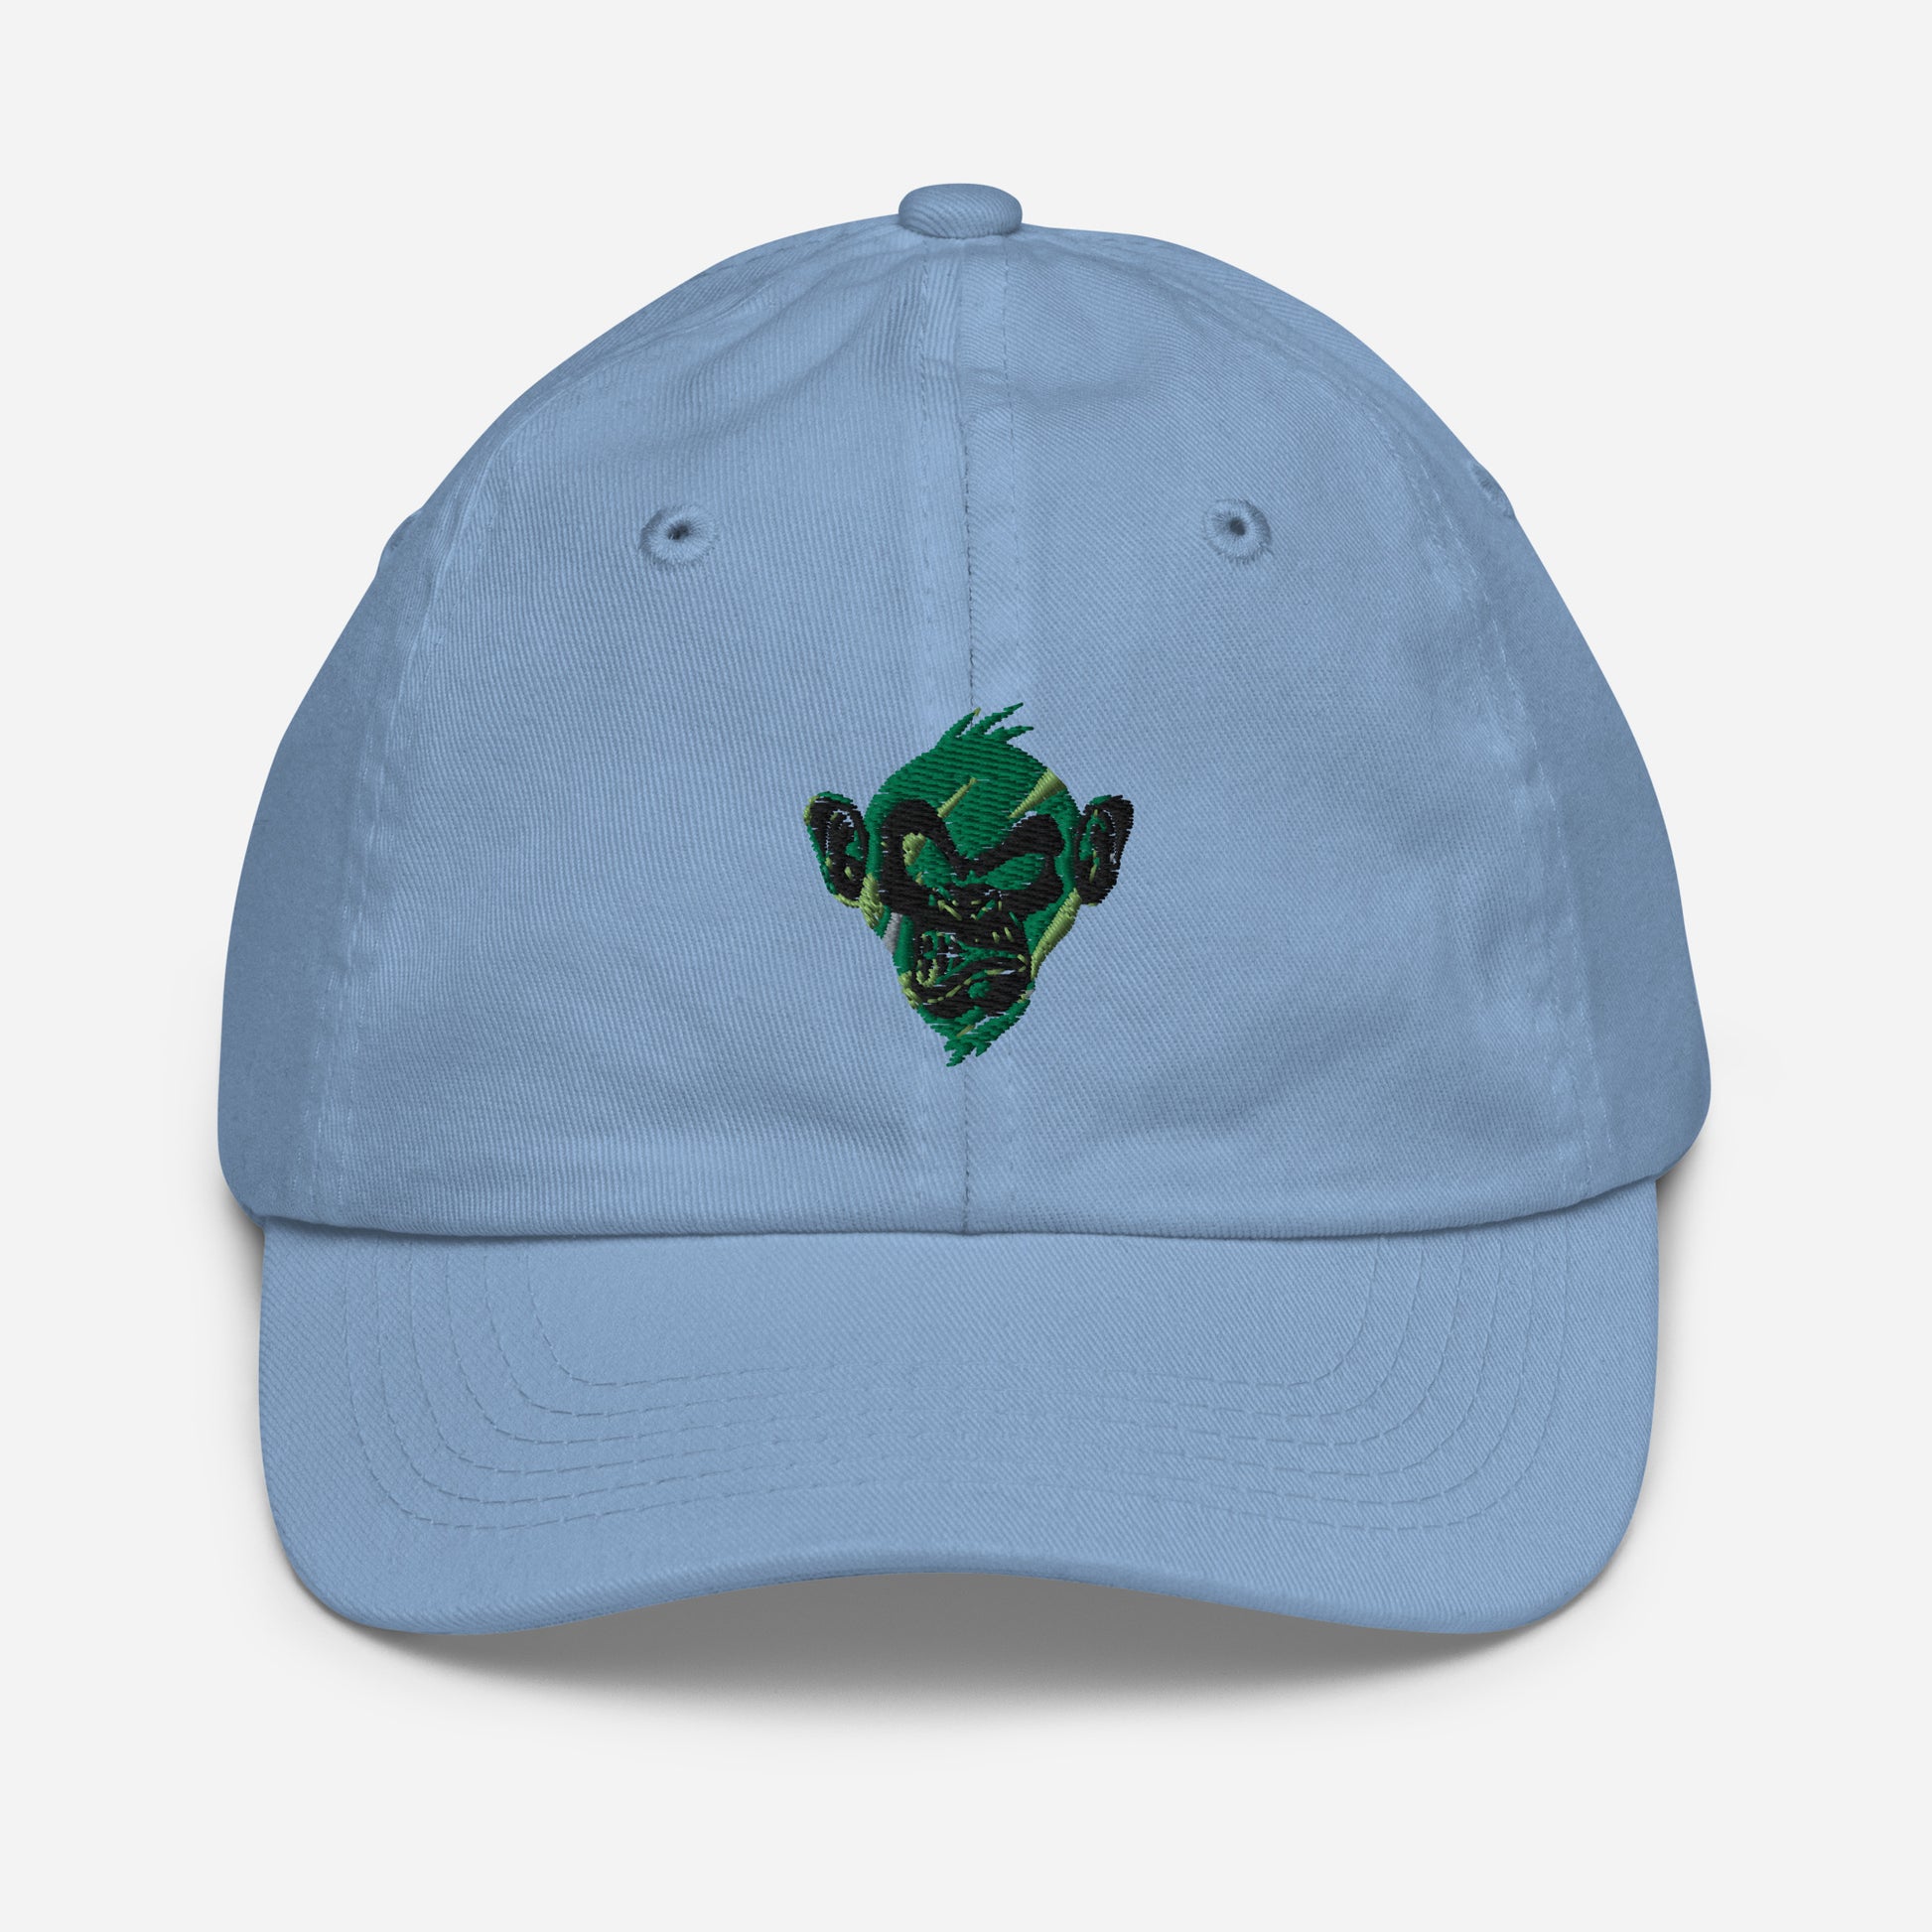 Baby blue baseball cap foor Youth with print of a Cool monkey in black light green